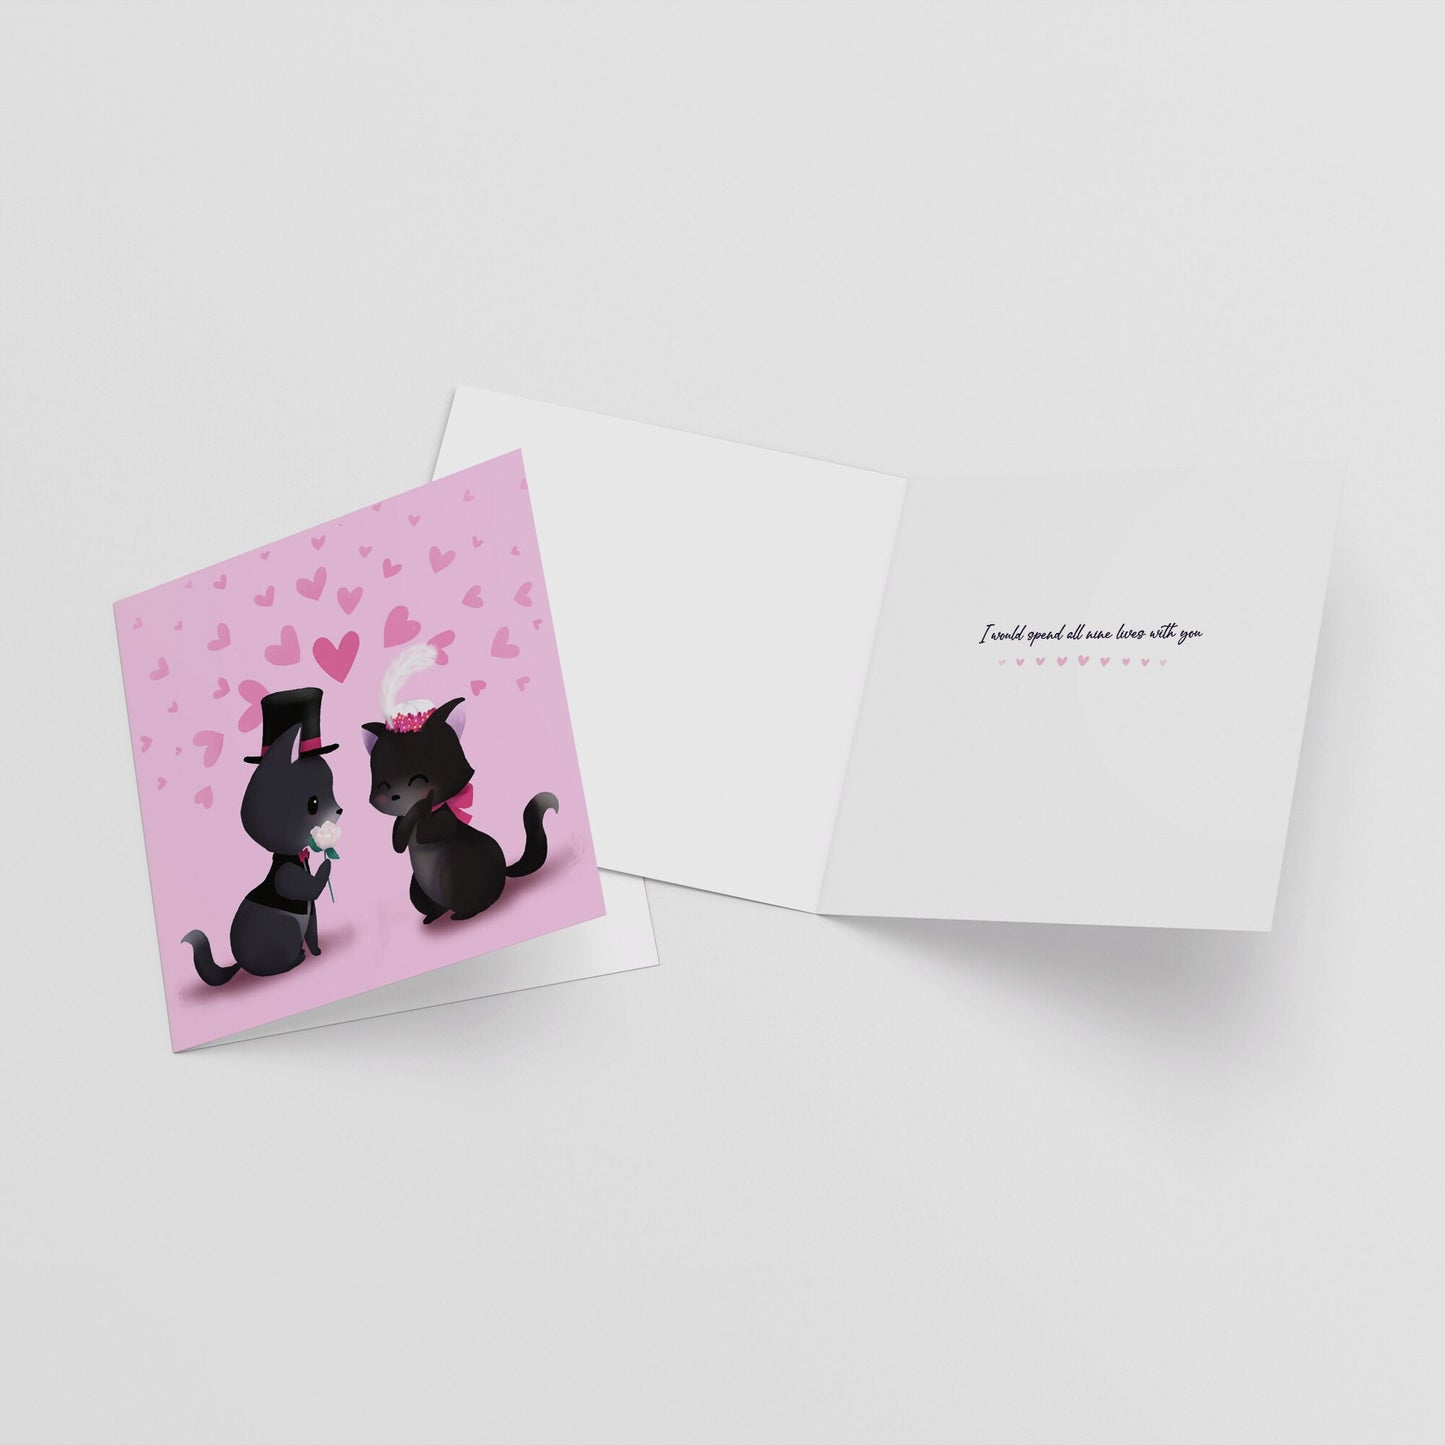 Valentines Day Card - Kitty Love in the Moonlight, "I Love You to the Moon & Back" - Greeting Card